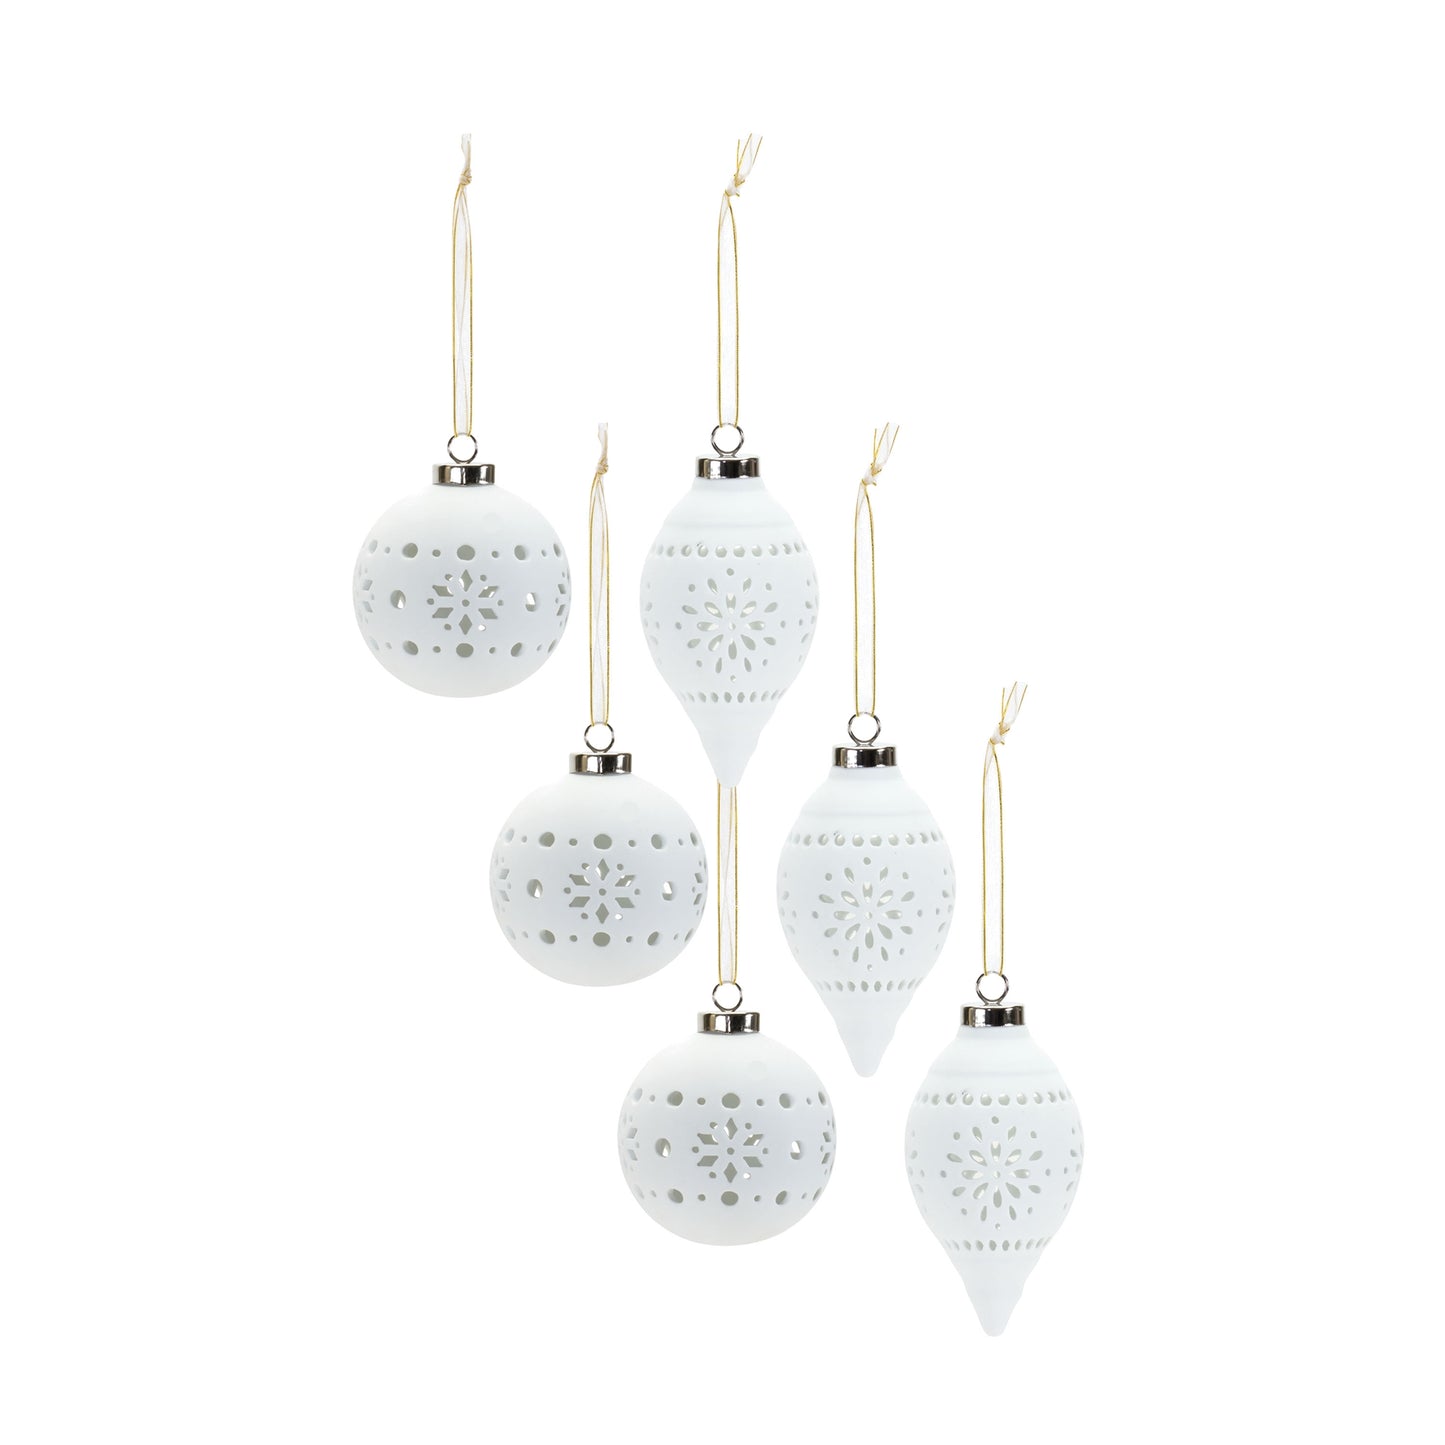 Porcelain Cut Out Ball Ornament with Nordic Design (Set of 6)